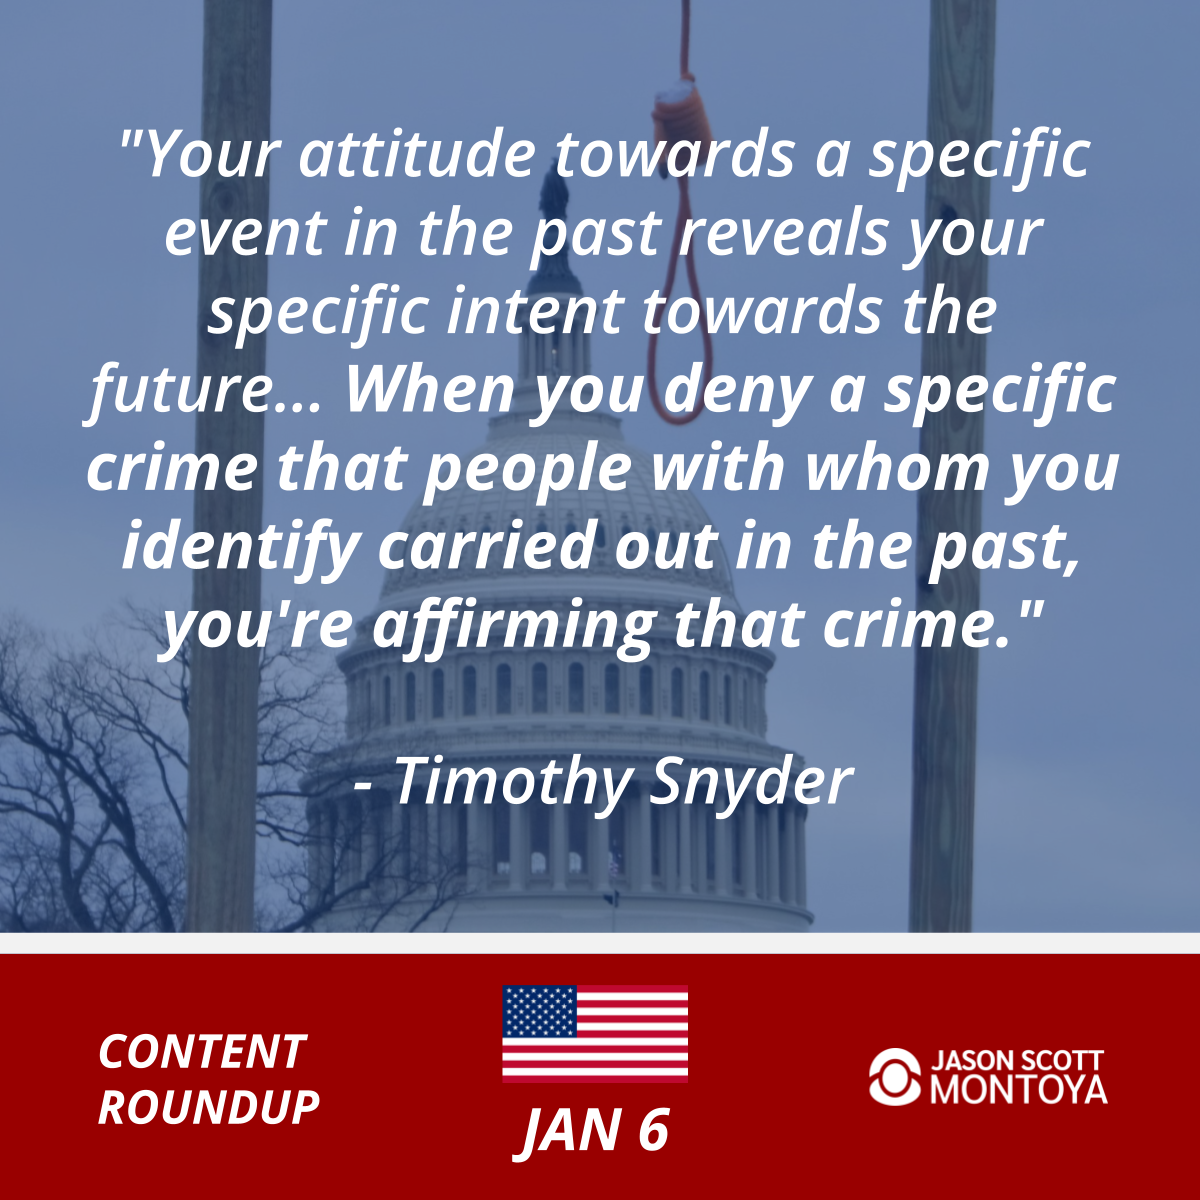 "Your attitude towards a specific event in the past reveals your specific intent towards the future… When you deny a specific crime that people with whom you identify carried out in the past, you're affirming that crime." - Timothy Snyder